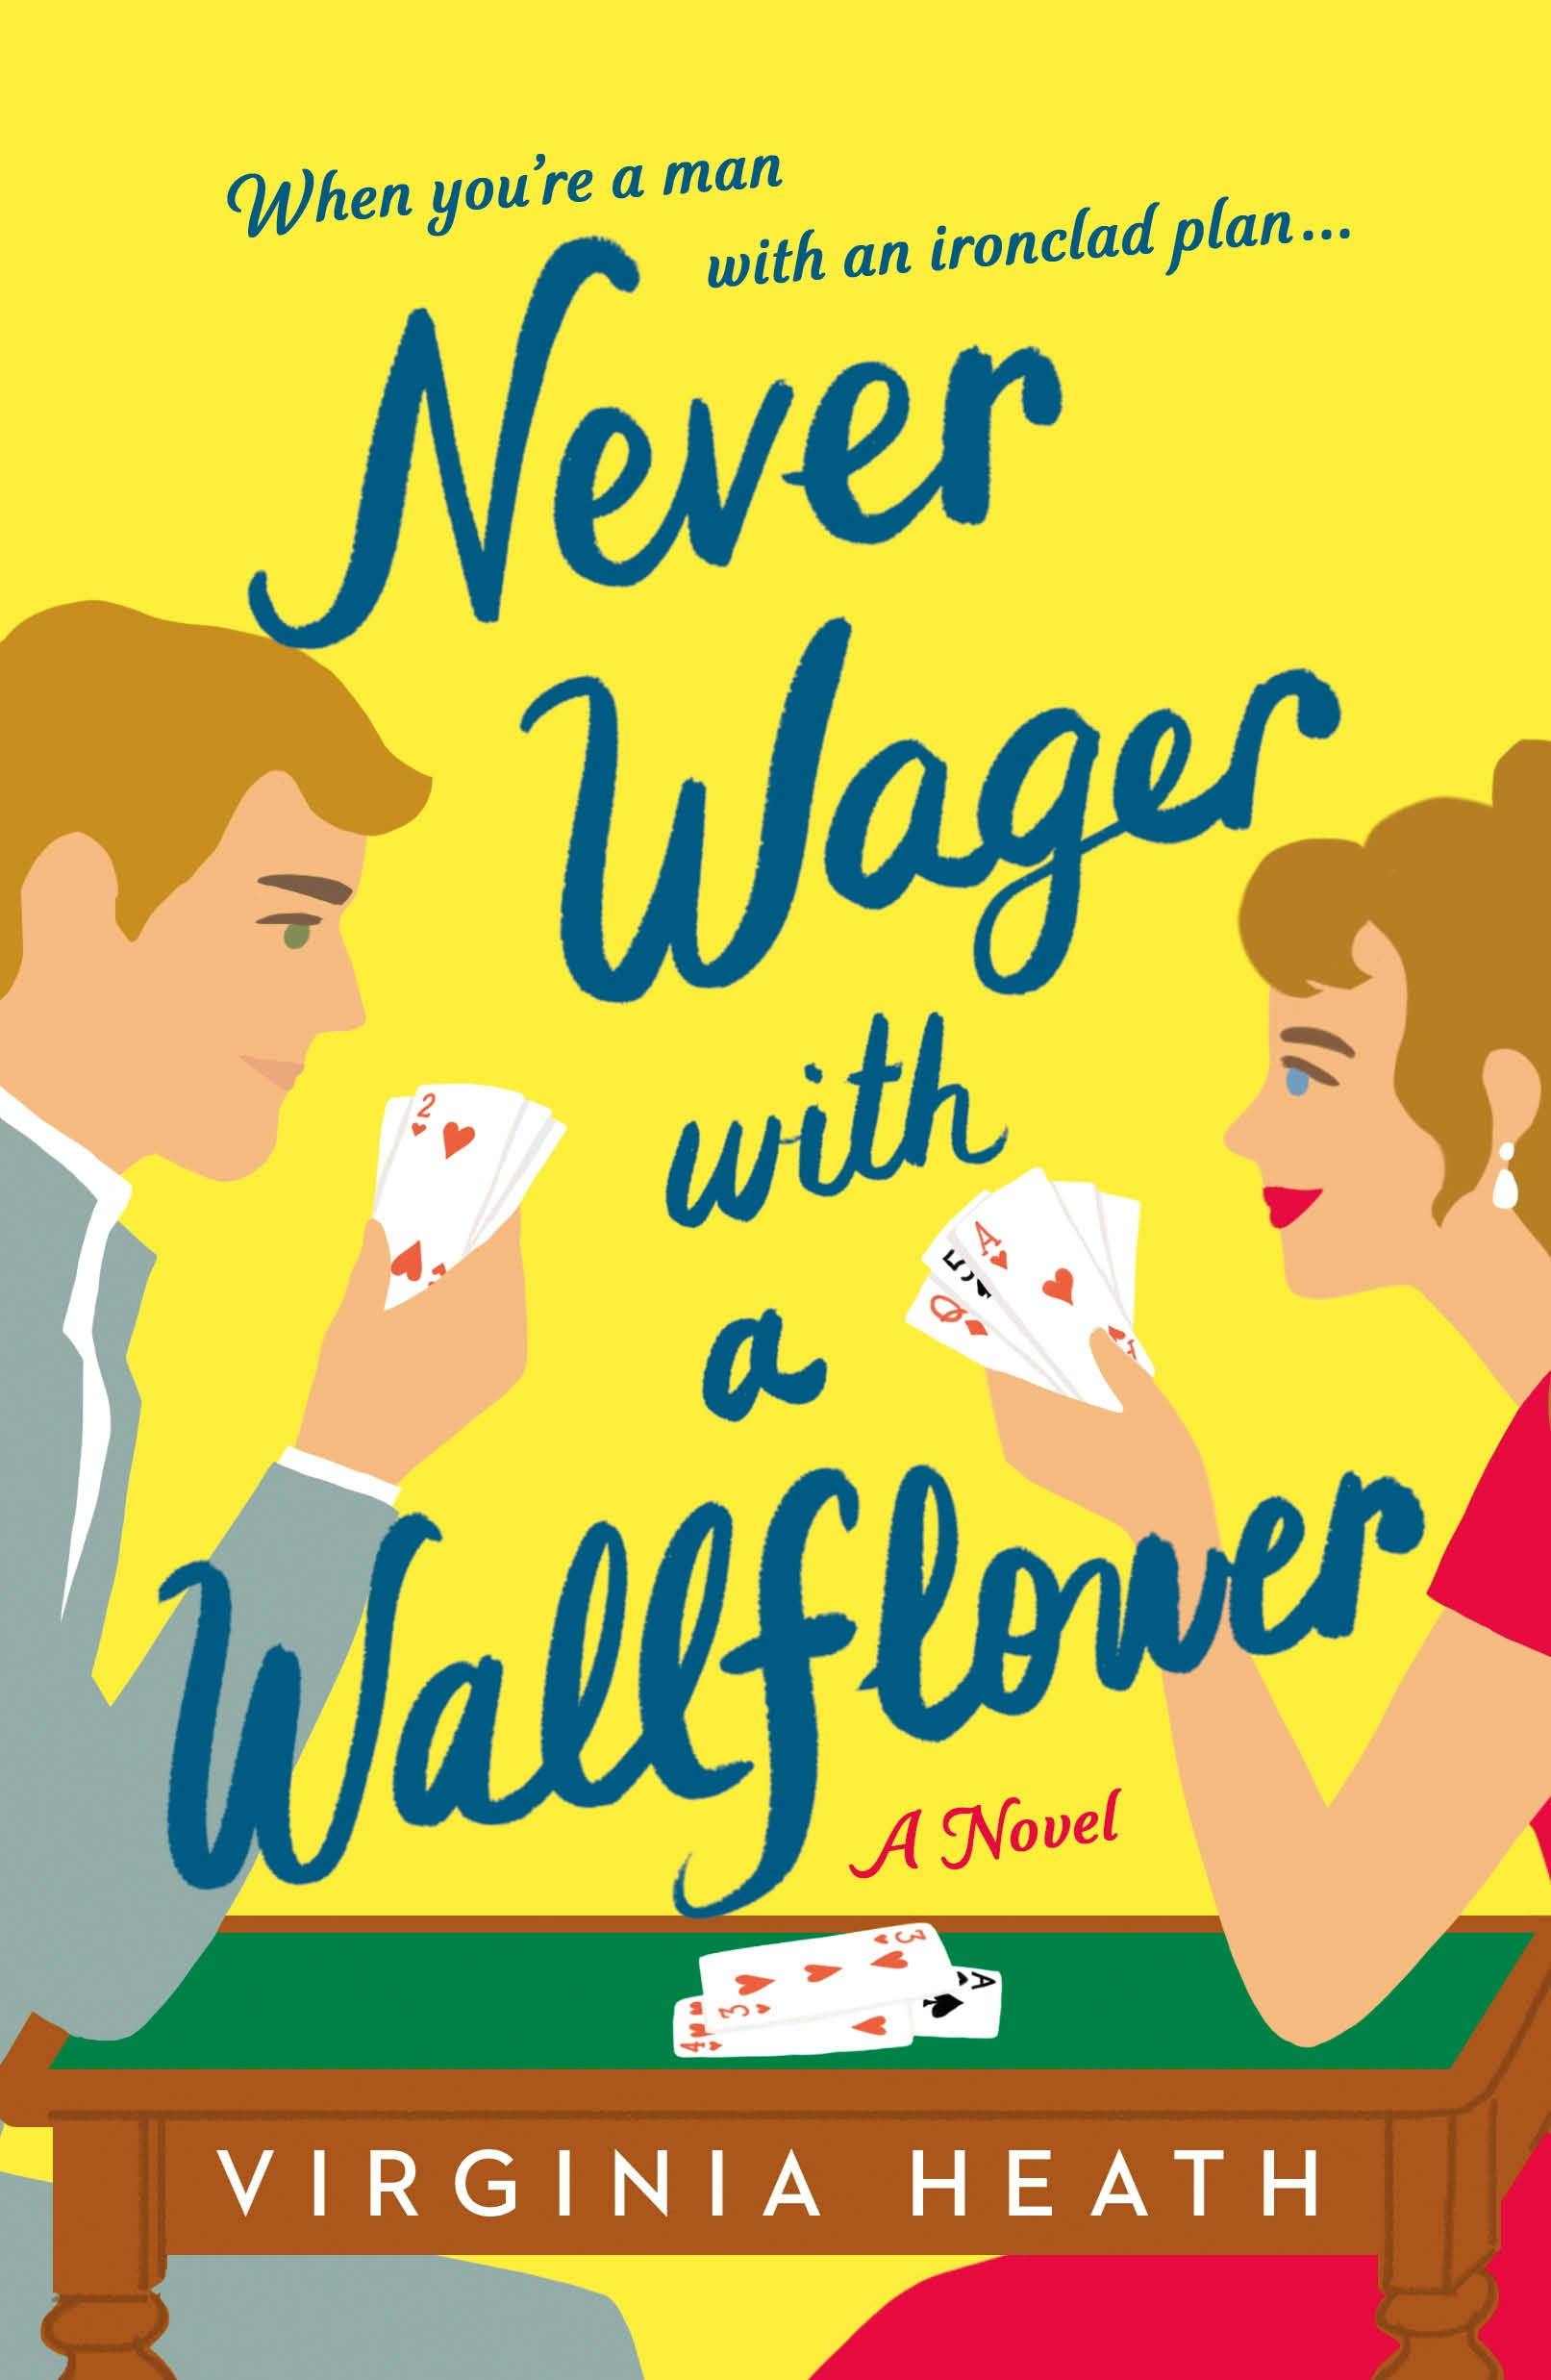 Never Wager with a Wallflower by Virginia Heath